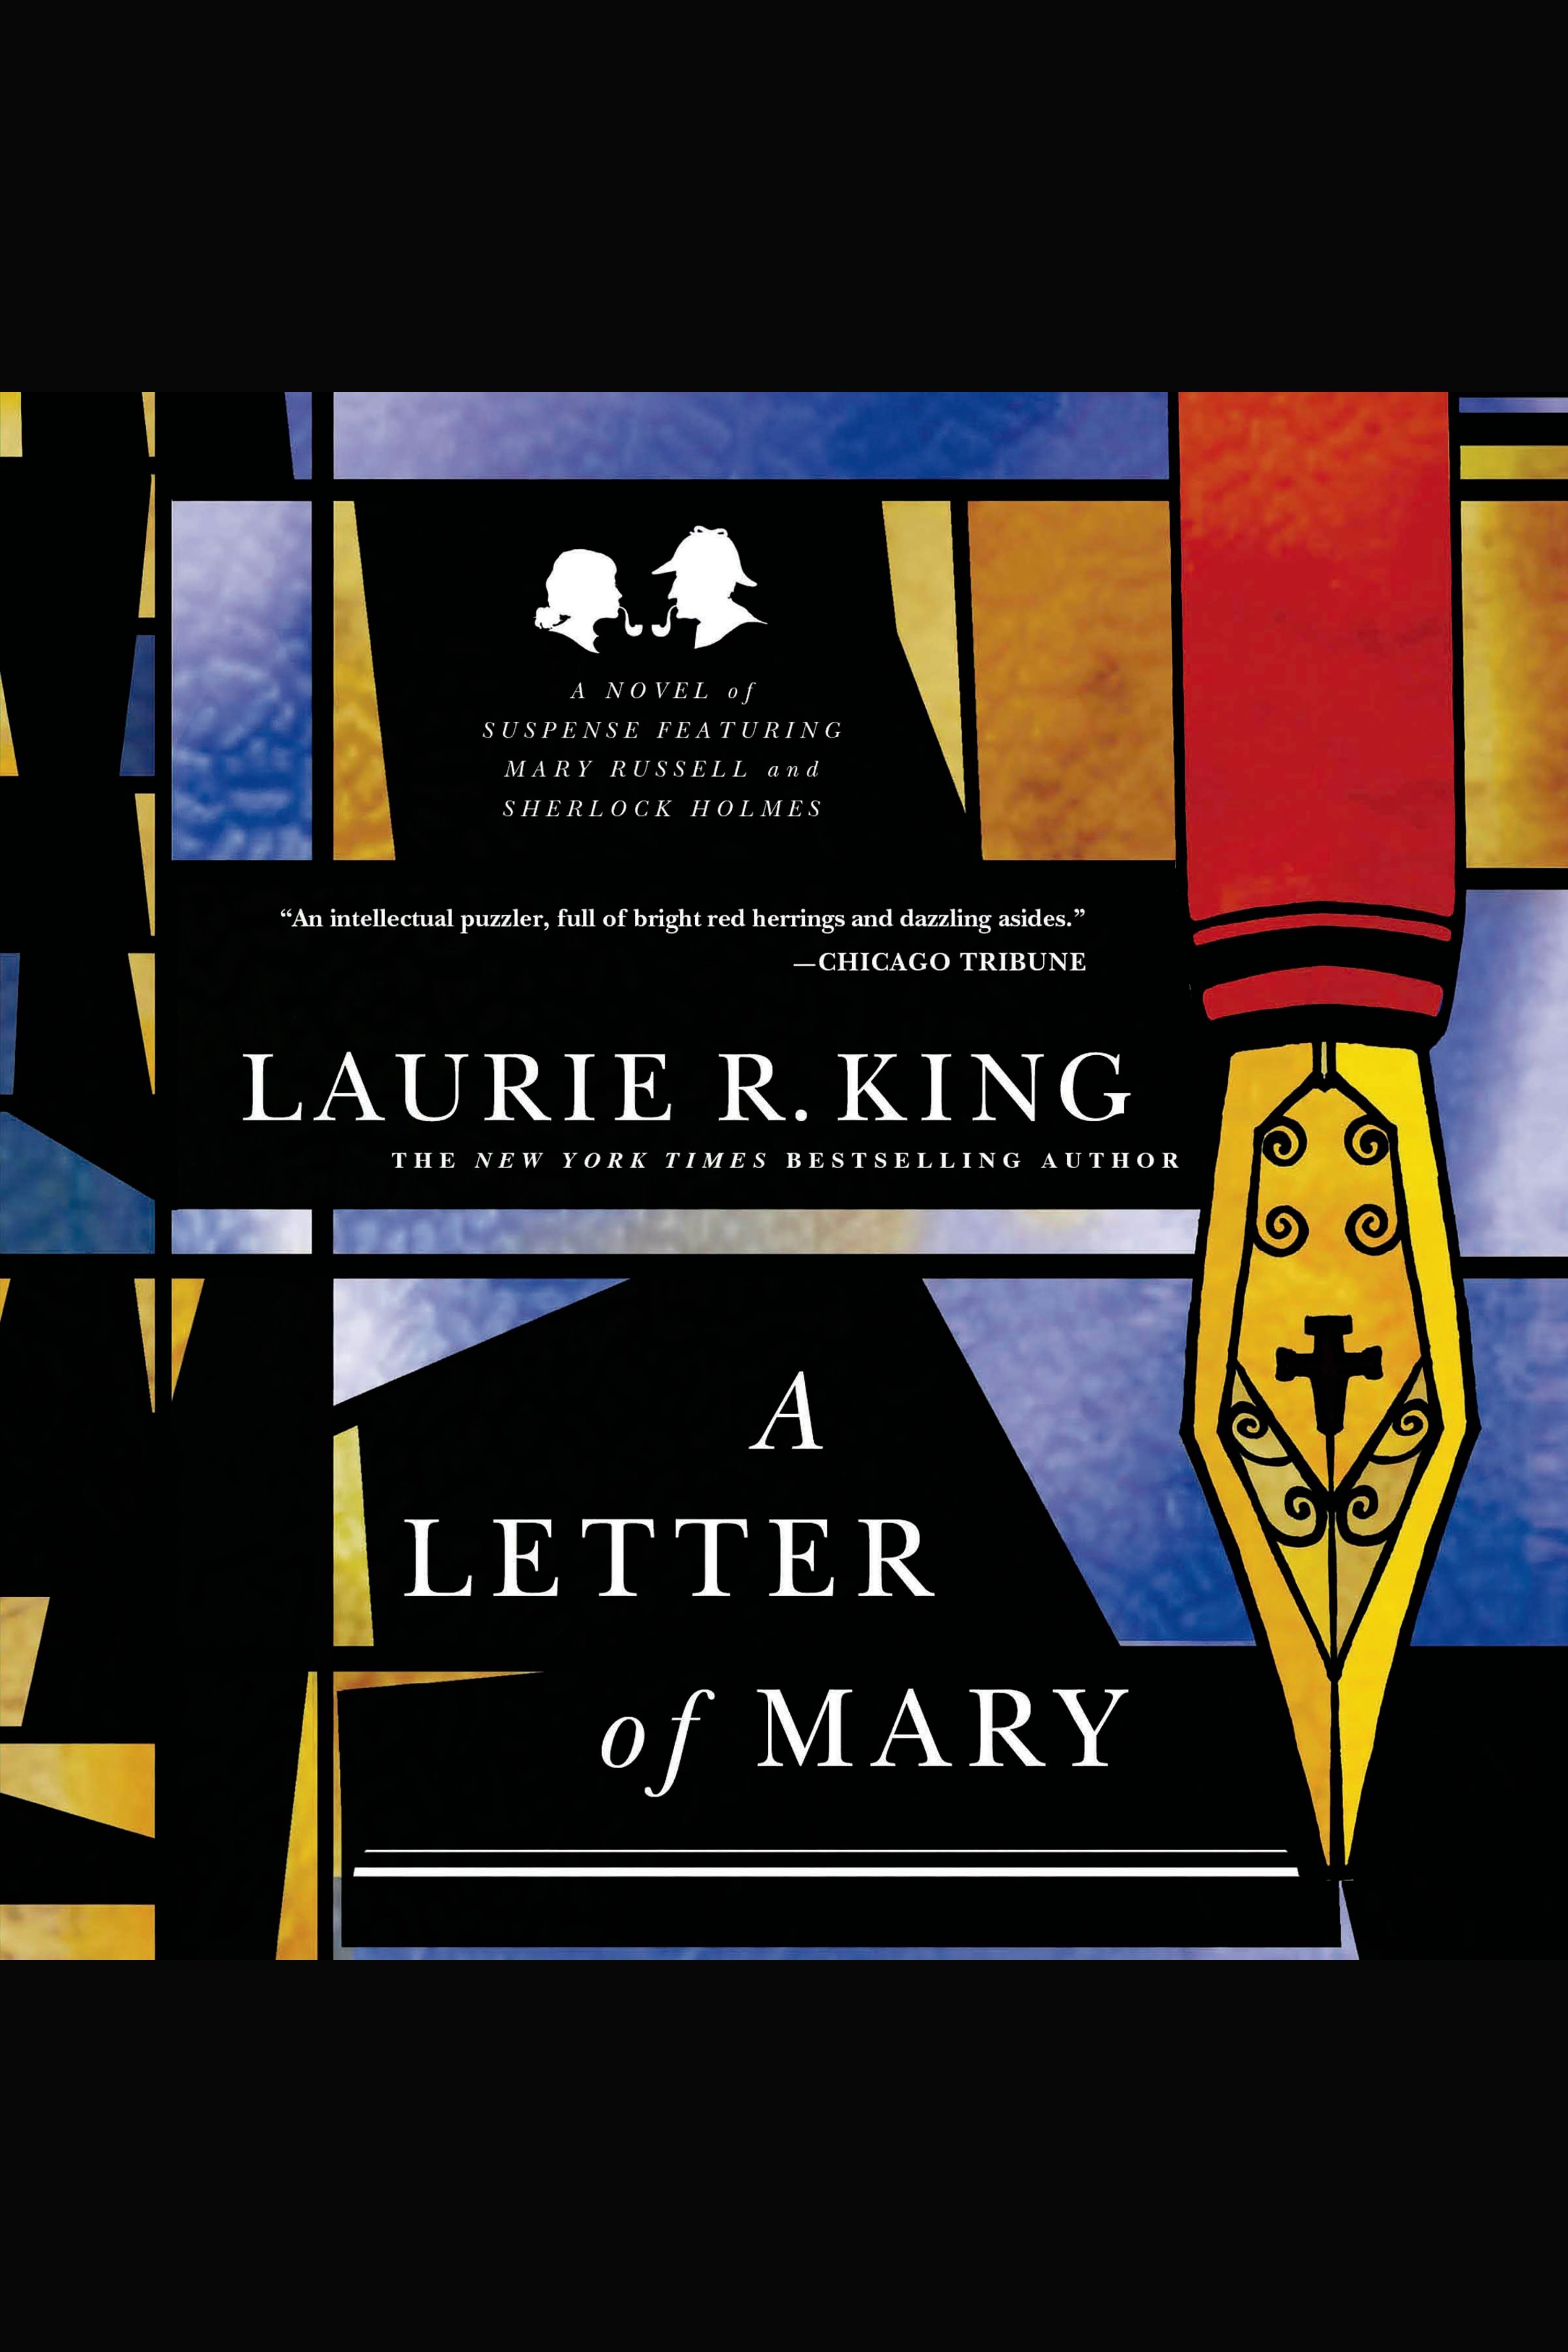 A Letter of Mary A Novel of Suspense Featuring Mary Russell and Sherlock Holmes cover image